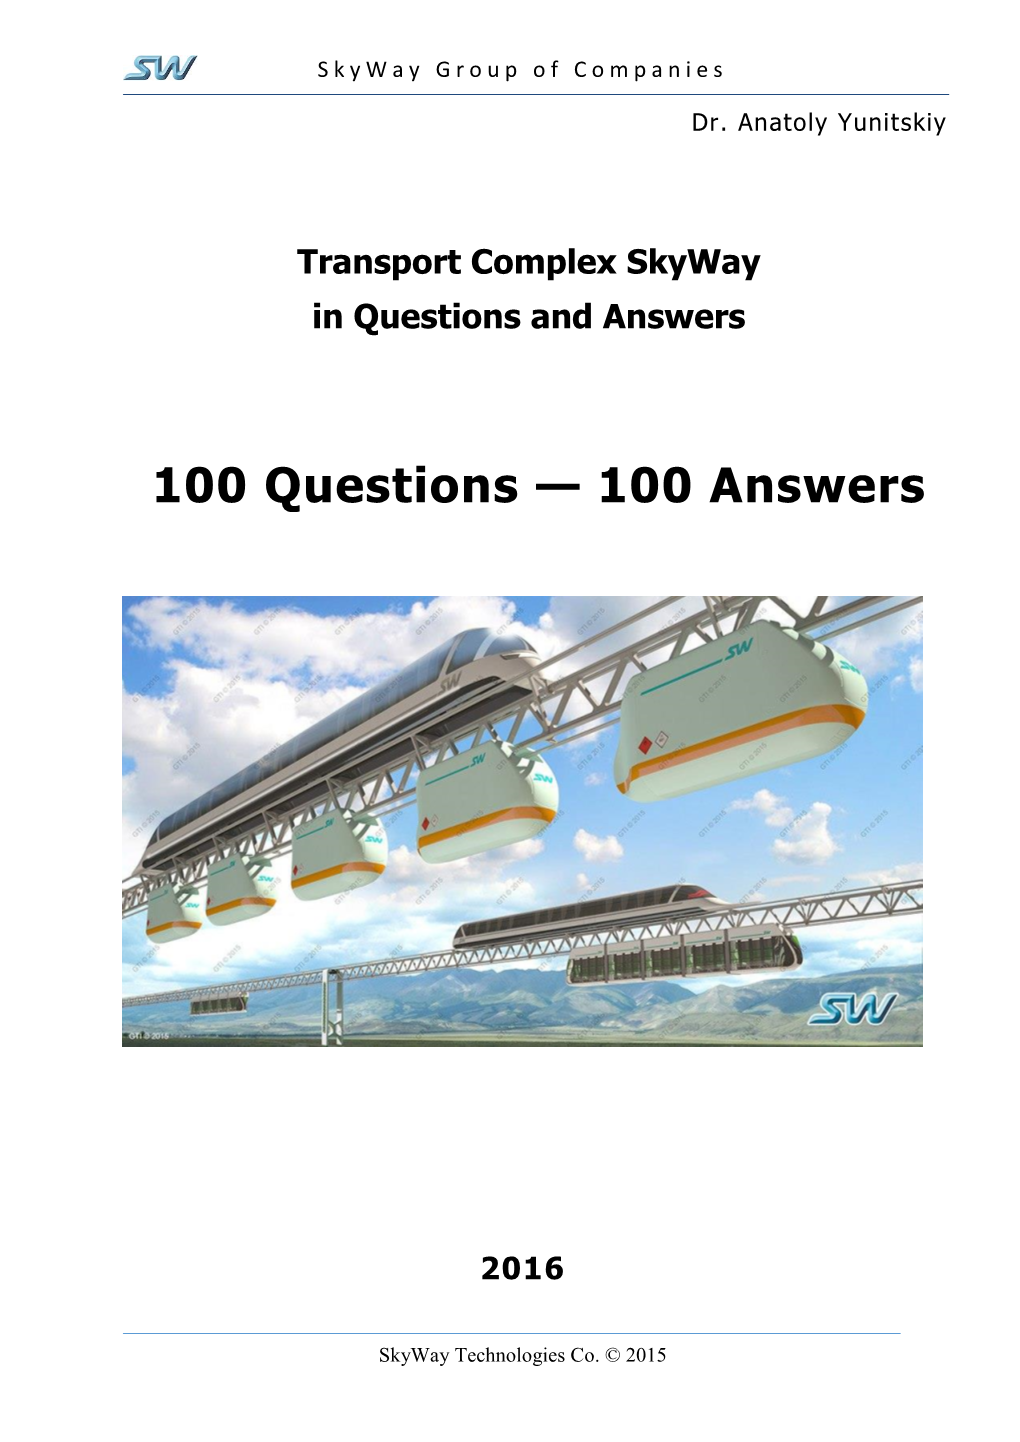 Transport Complex Skyway in Questions and Answers